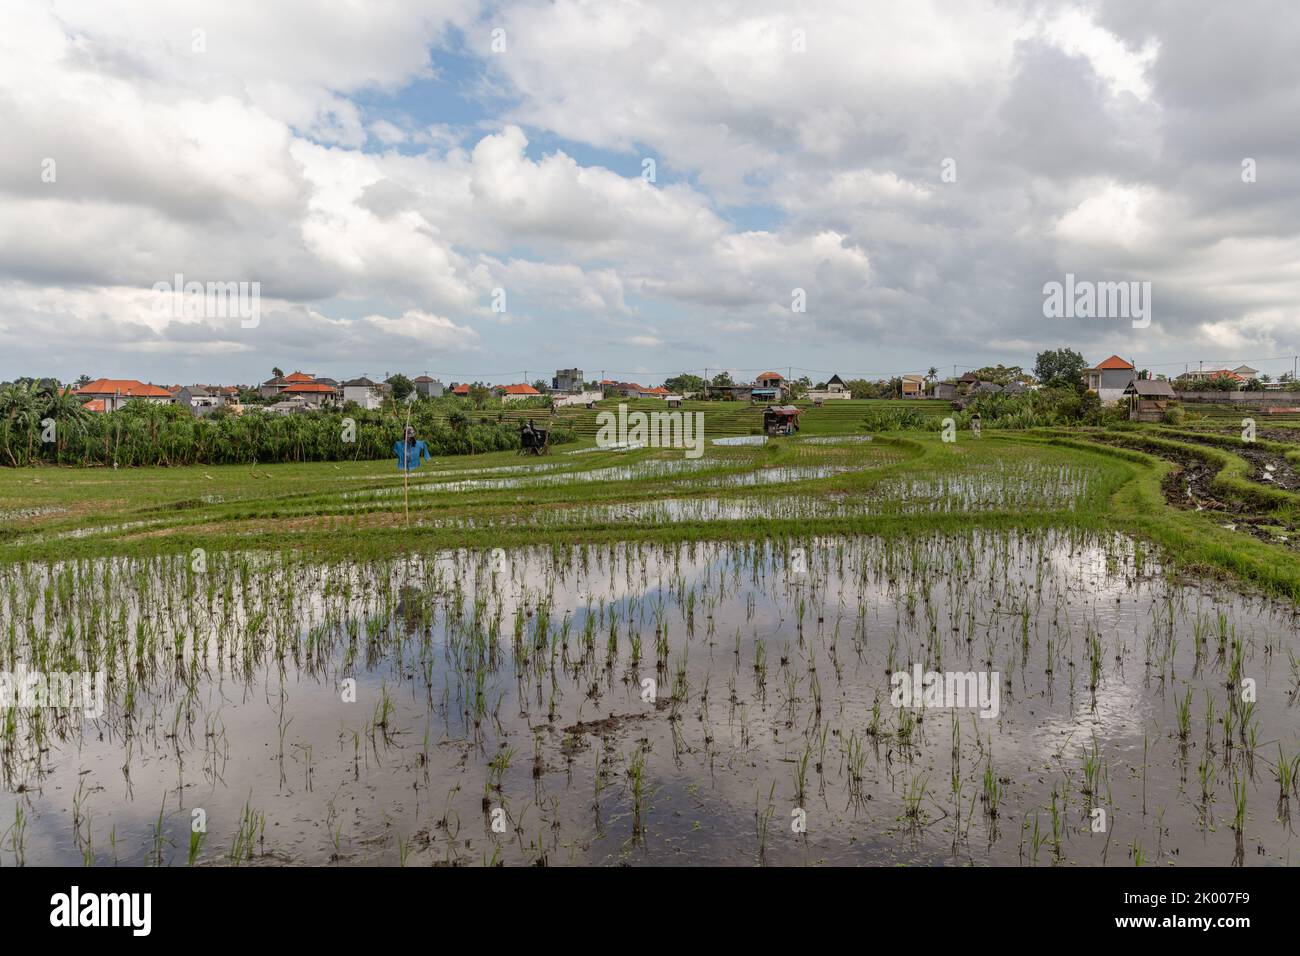 Flooded rice field and village houses, cloud reflection in the water, rural landscape. Babakan, Badung, Bali Island, Indonesia Stock Photo